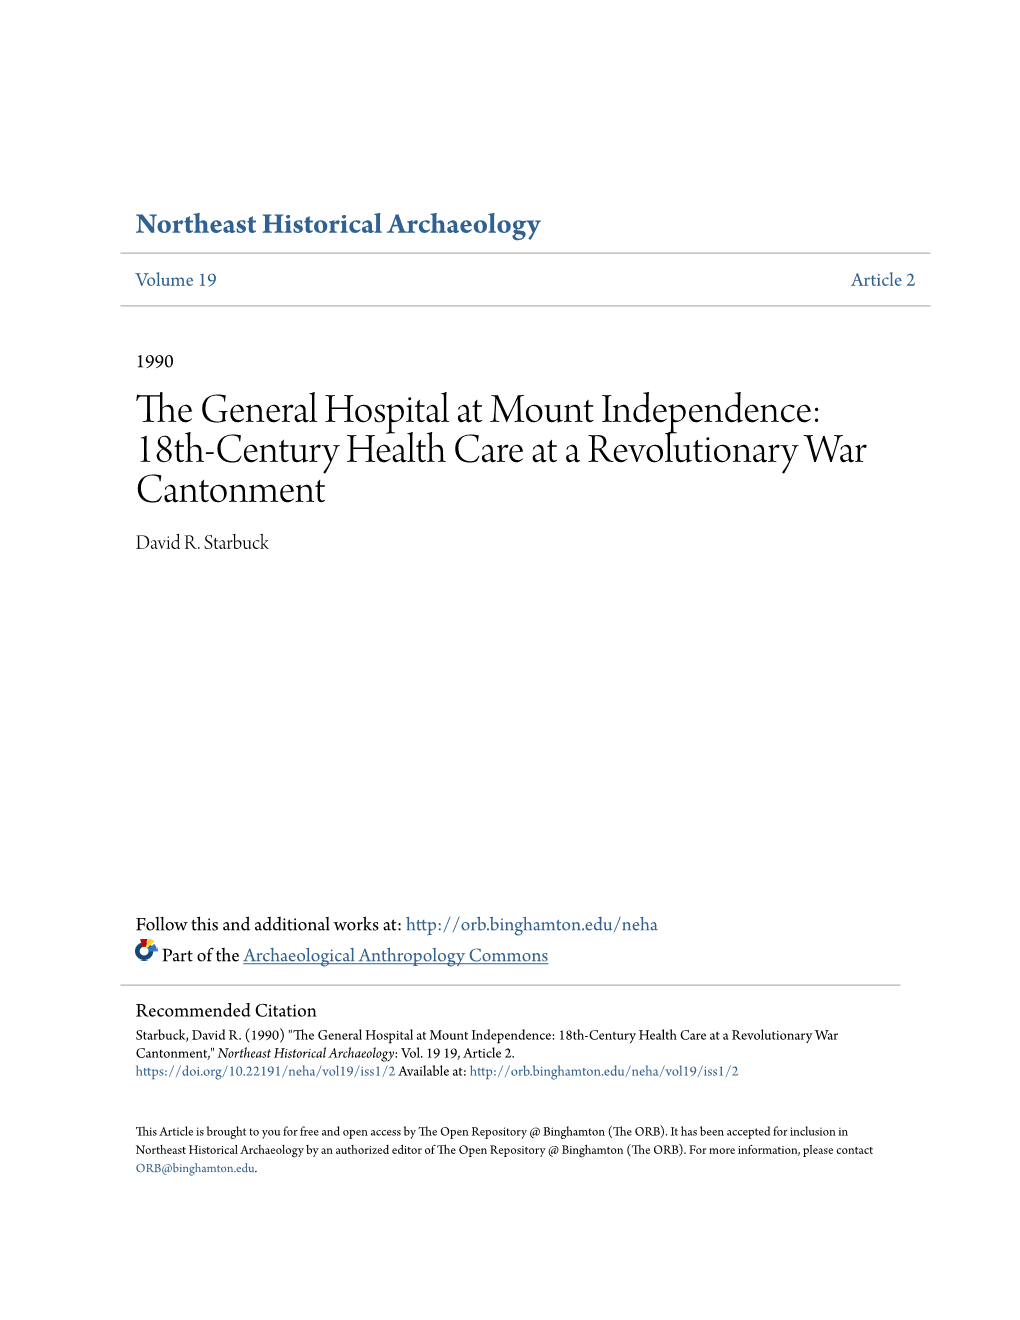 The General Hospital at Mount Independence: 18Th-Century Health Care at a Revolutionary War Cantonment David R